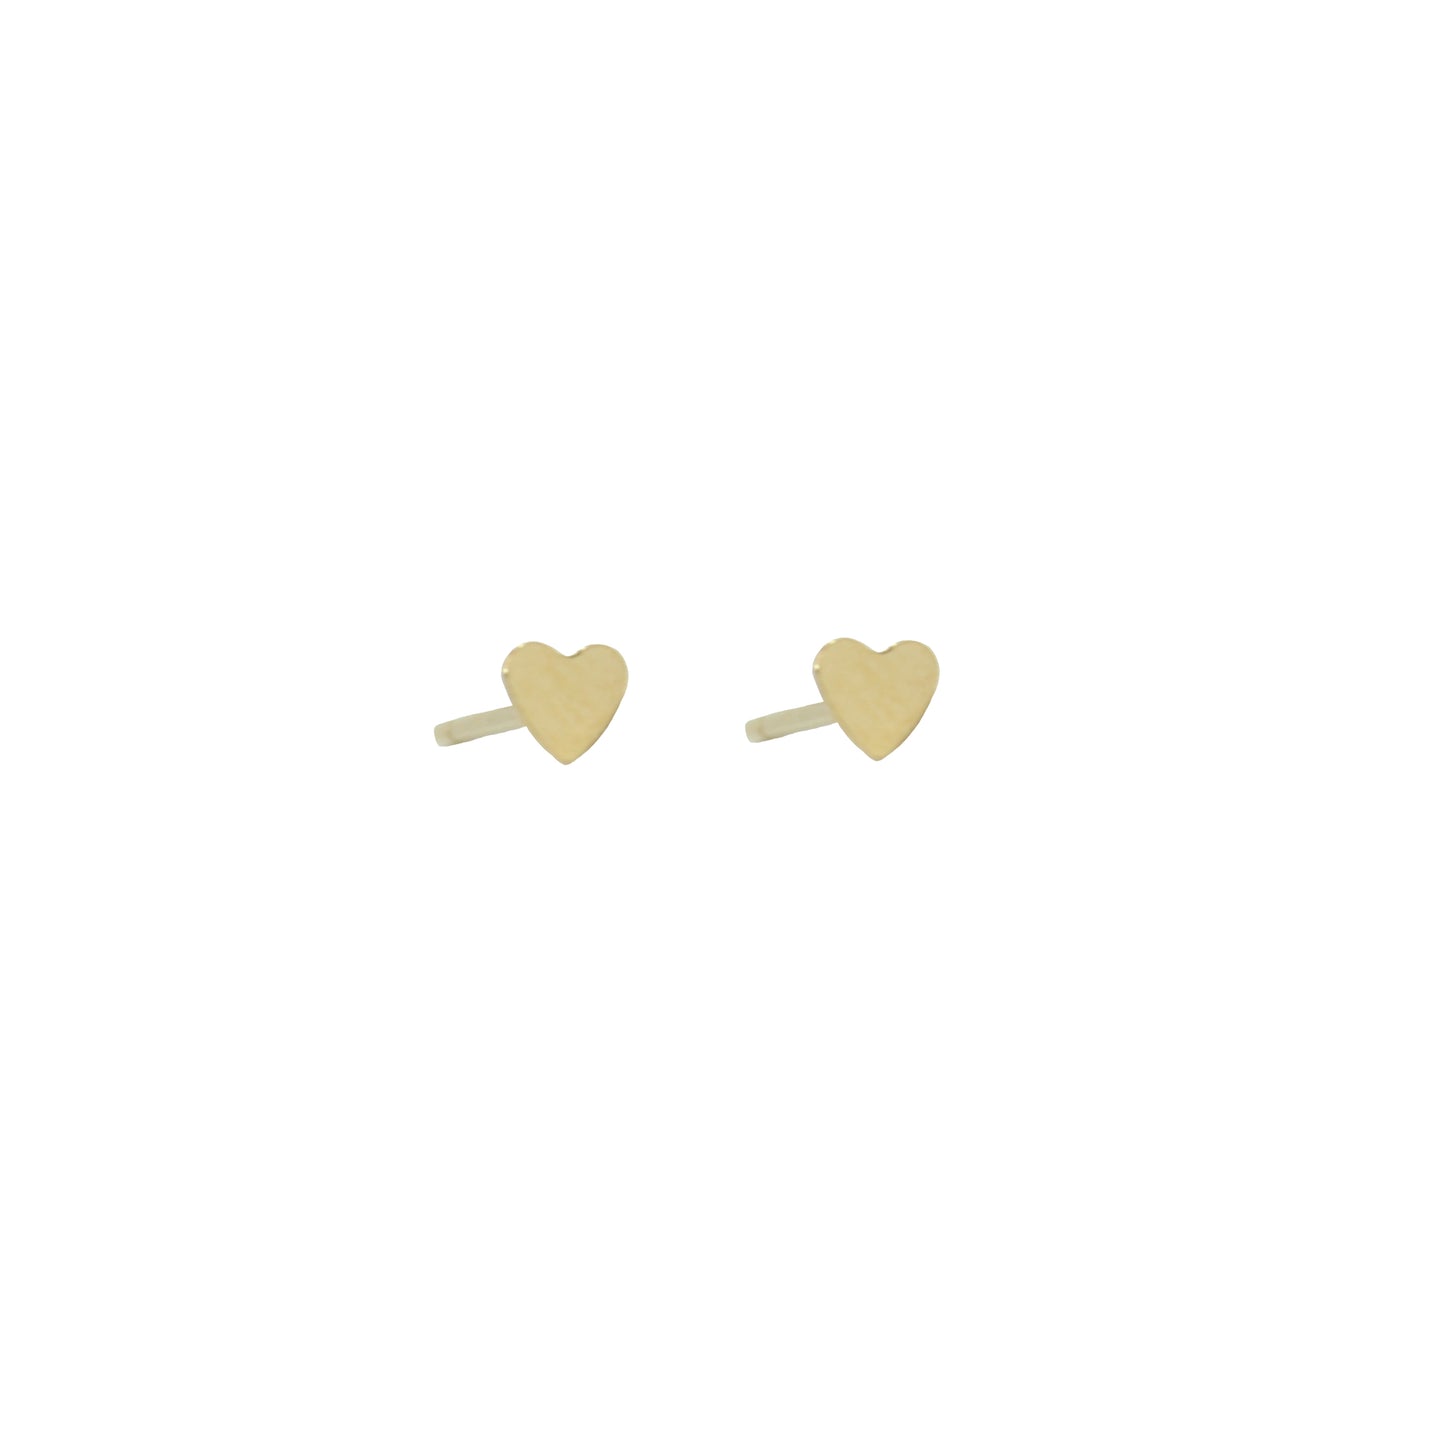 Load image into Gallery viewer, gold filled heart stamped stud. gold heart stamped stud. heart stamped stud.  heart stud earring. gold filled heart stud earring. heart stud. gold heart earring. gold heart stud. heart earrings for little girls. heart earrings for valentines day. Gems by Laura. 
